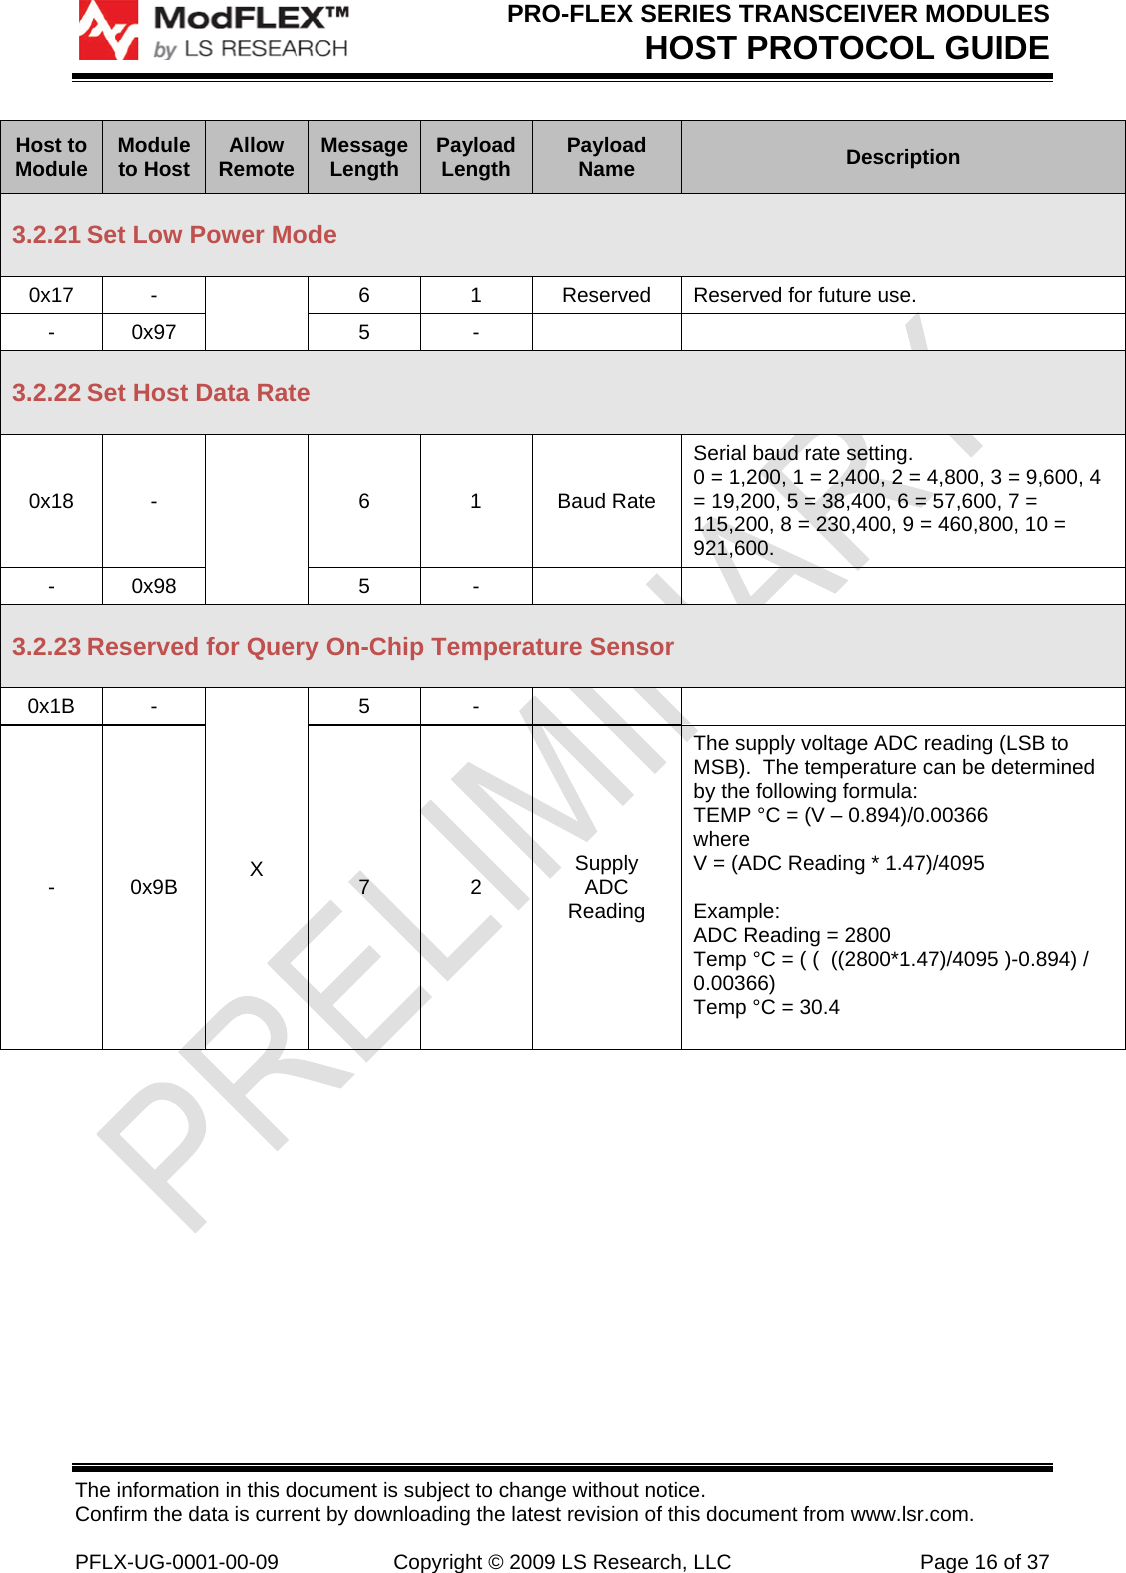 PRO-FLEX SERIES TRANSCEIVER MODULES HOST PROTOCOL GUIDE The information in this document is subject to change without notice. Confirm the data is current by downloading the latest revision of this document from www.lsr.com.  PFLX-UG-0001-00-09  Copyright © 2009 LS Research, LLC  Page 16 of 37 Host to Module  Module to Host  Allow Remote  Message Length  Payload Length  Payload Name  Description 3.2.21 Set Low Power Mode 0x17 -   6  1  Reserved  Reserved for future use. - 0x97  5  -     3.2.22 Set Host Data Rate 0x18 -   6 1 Baud Rate Serial baud rate setting. 0 = 1,200, 1 = 2,400, 2 = 4,800, 3 = 9,600, 4 = 19,200, 5 = 38,400, 6 = 57,600, 7 = 115,200, 8 = 230,400, 9 = 460,800, 10 = 921,600. - 0x98  5  -     3.2.23 Reserved for Query On-Chip Temperature Sensor 0x1B - X 5 -    - 0x9B  7  2  Supply ADC Reading The supply voltage ADC reading (LSB to MSB).  The temperature can be determined by the following formula: TEMP °C = (V – 0.894)/0.00366 where V = (ADC Reading * 1.47)/4095  Example: ADC Reading = 2800 Temp °C = ( (  ((2800*1.47)/4095 )-0.894) / 0.00366)  Temp °C = 30.4  